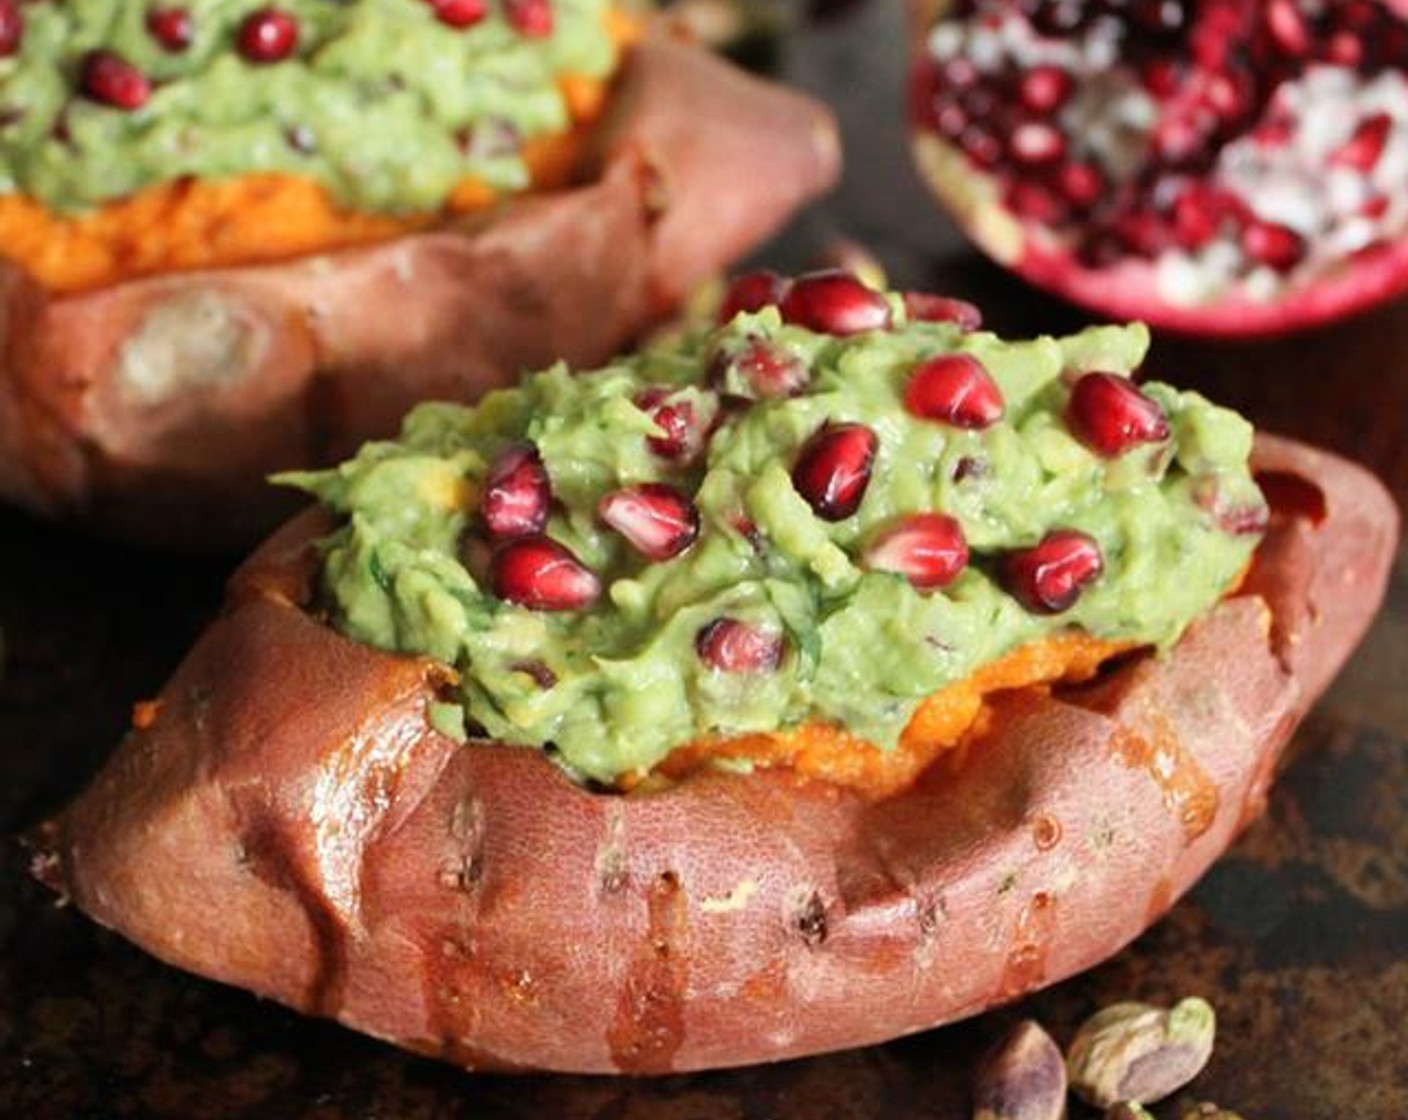 Chipotle Mashed Sweet Potatoes with Pomegranate-Pistachio Guacamole